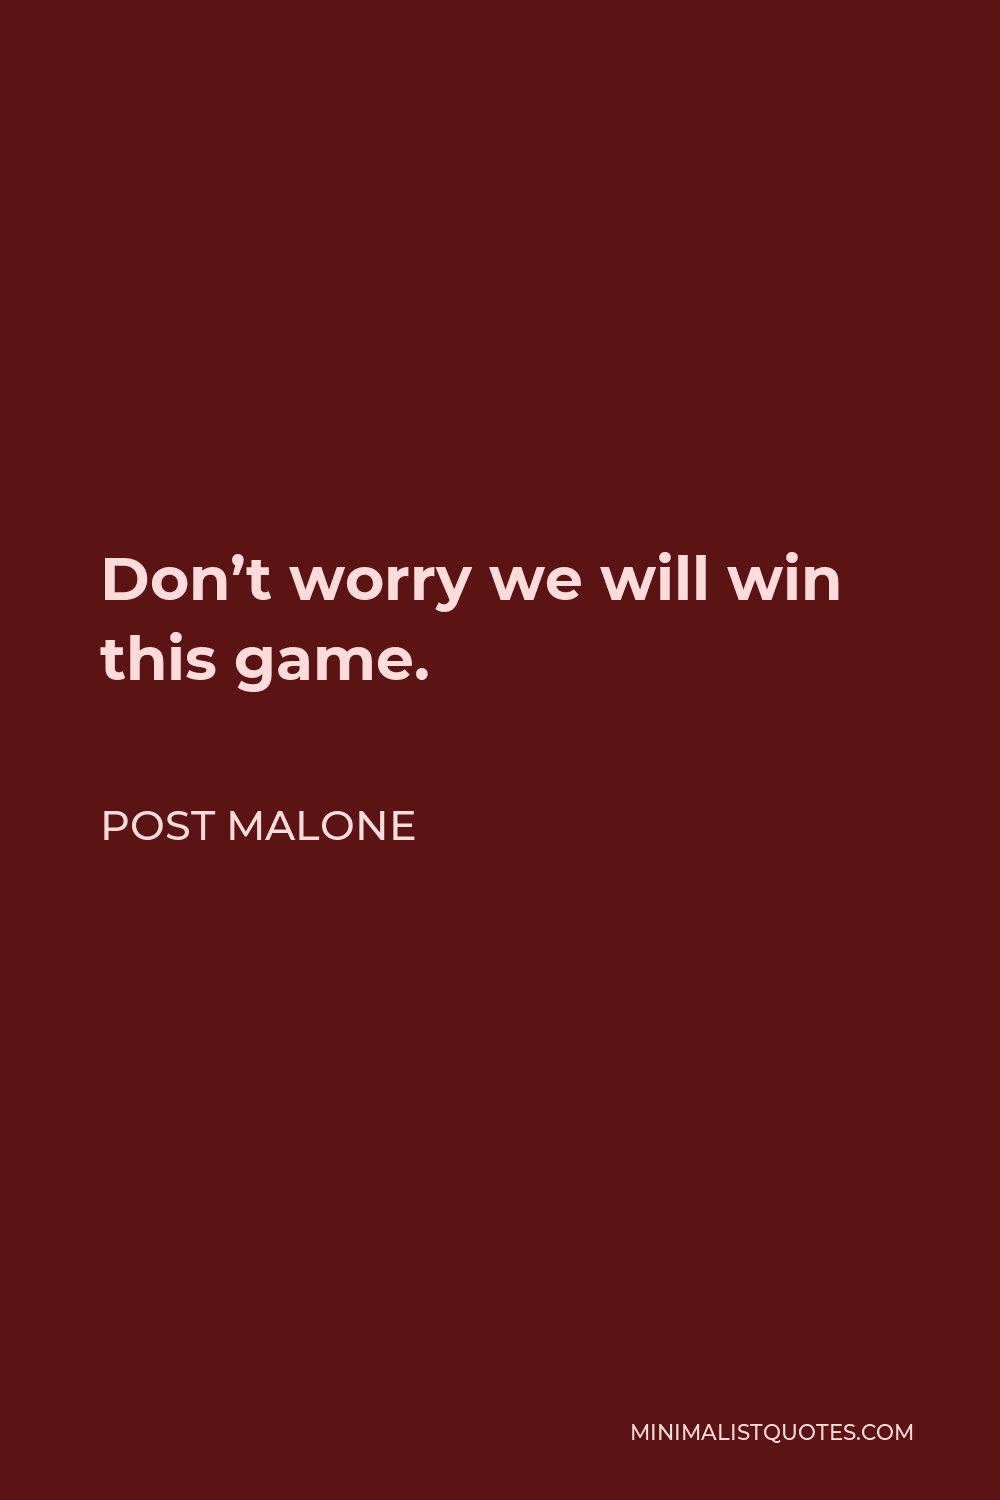 Post Malone Quote - Don’t worry we will win this game.